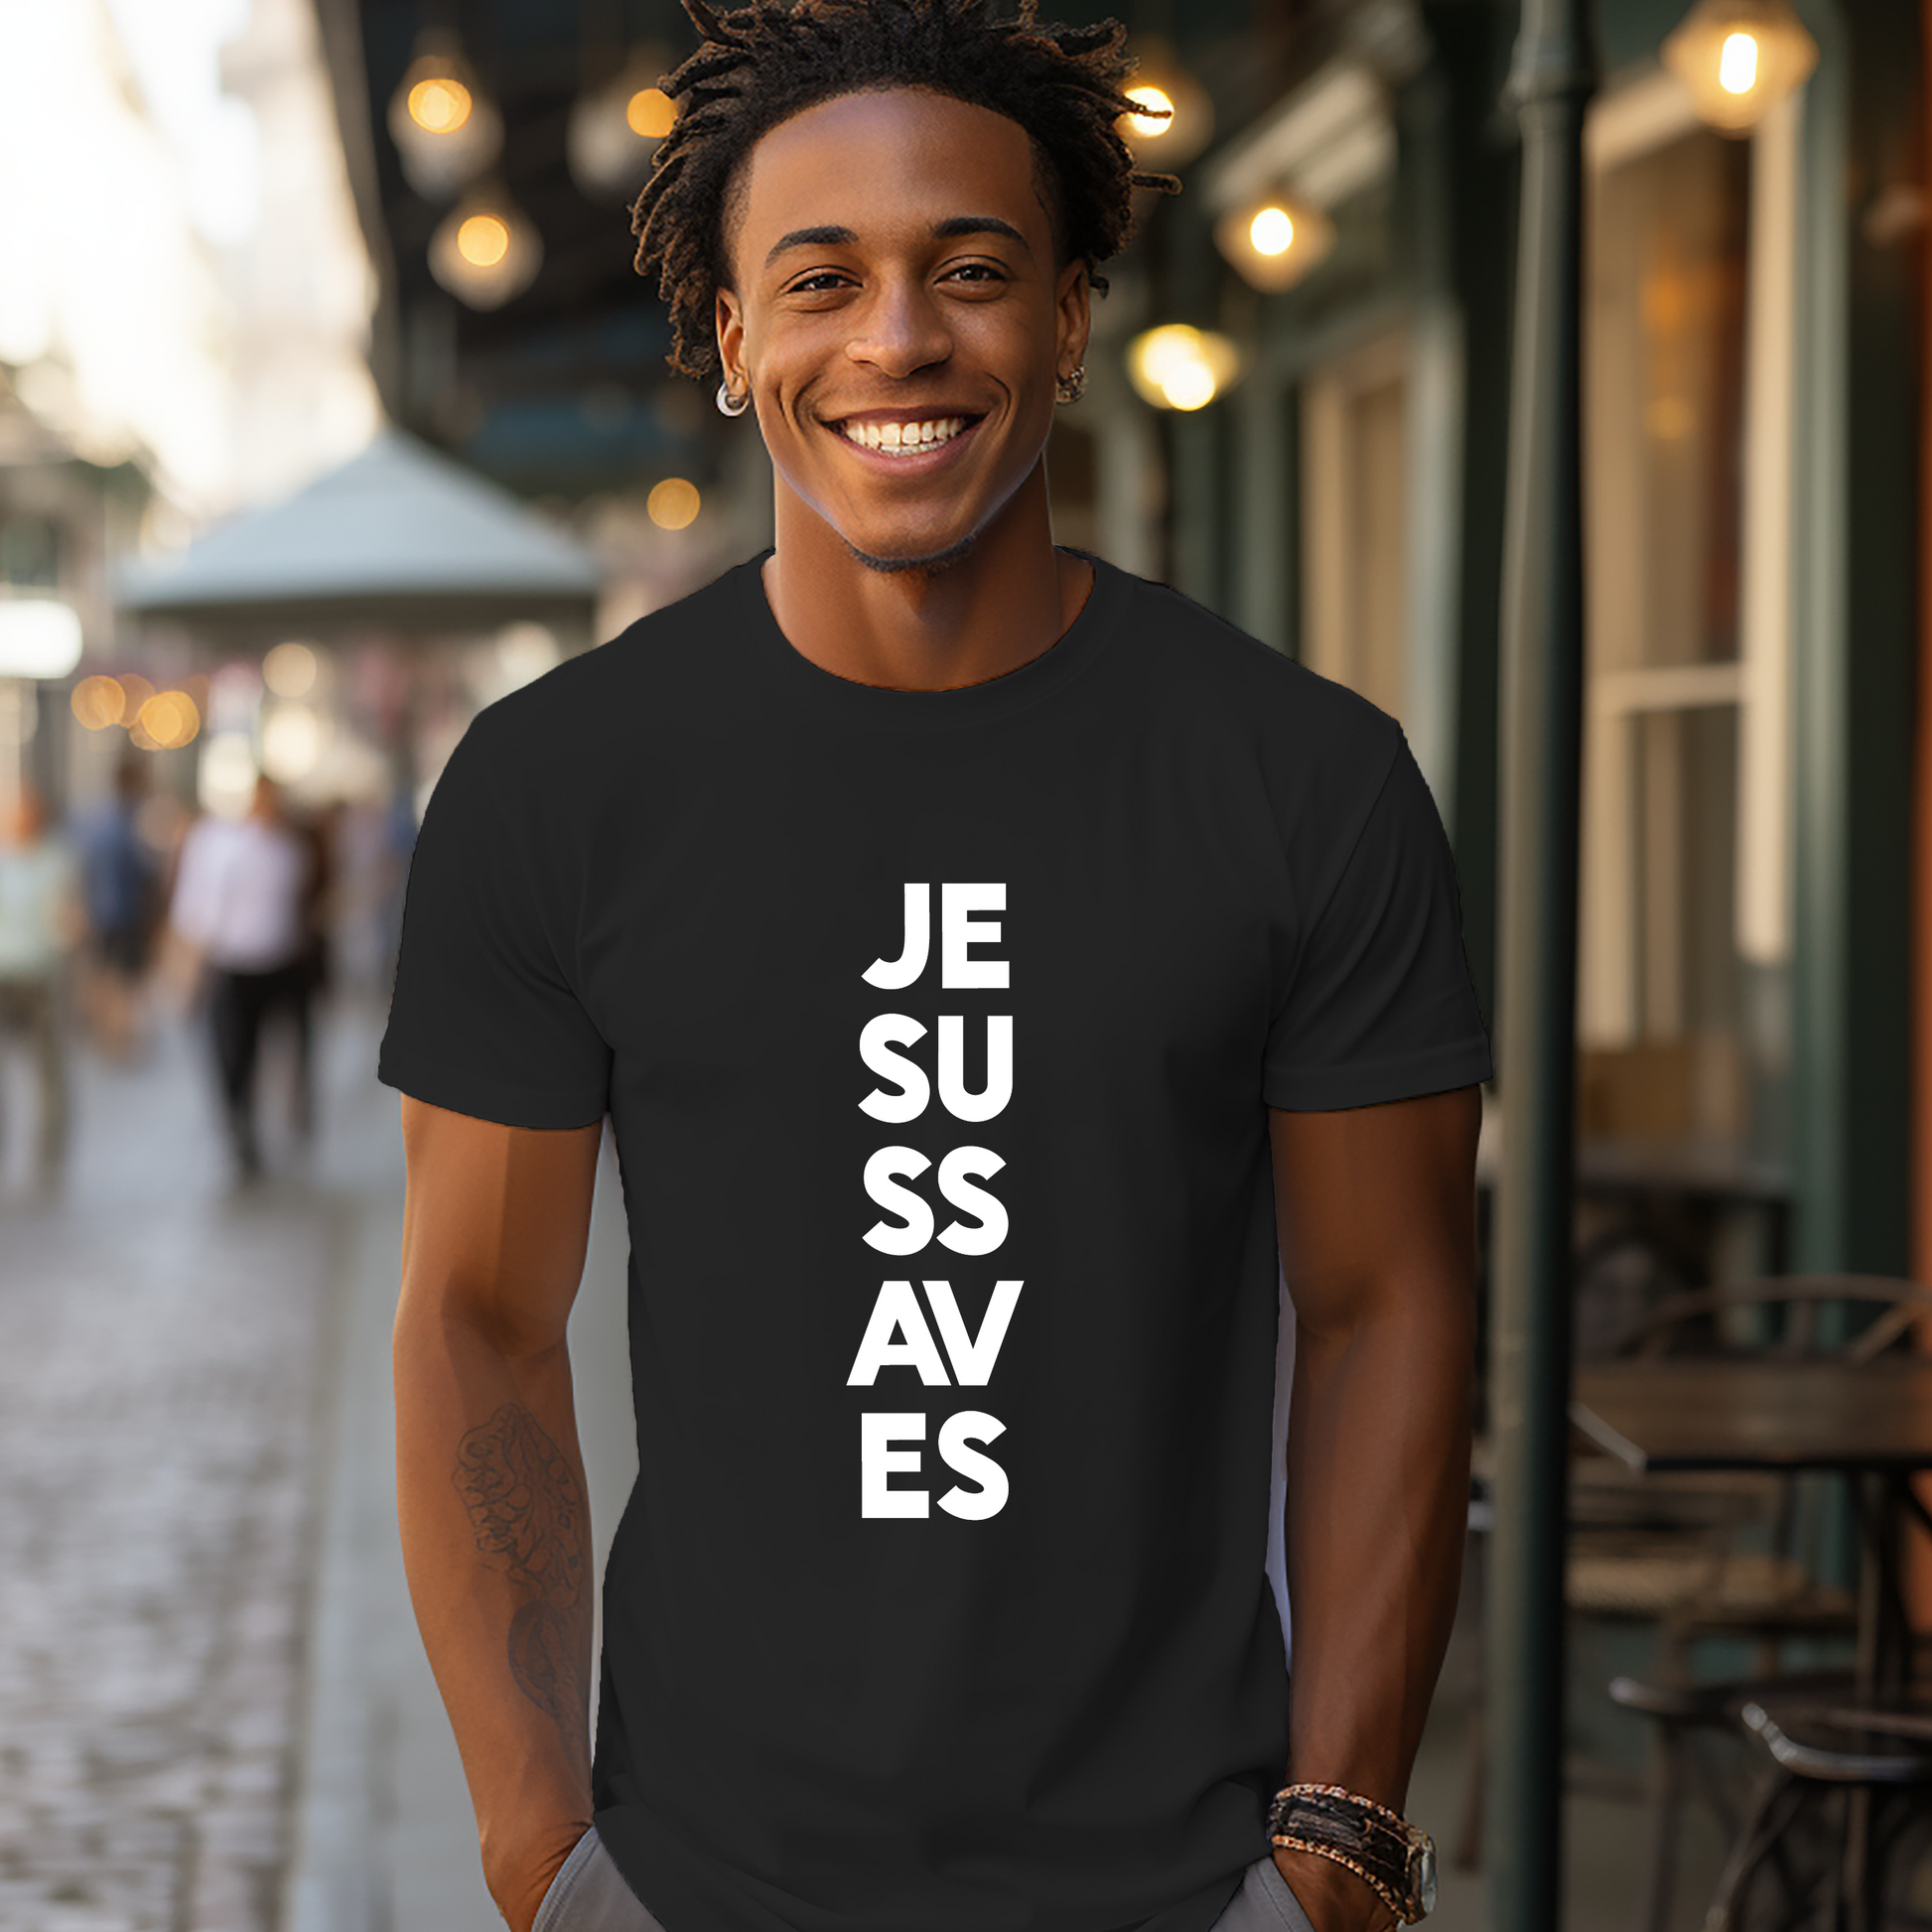 Shop for our Jesus Saves Unisex Christian T-shirt. This Triumph Tee is black, comfortable, and soft. Our Jesus tee will help you spread the Gospel without saying a word. This faith t-shirt is great to wear on a Sunday morning, or a night out on the town. Get your faith-based apparel today!